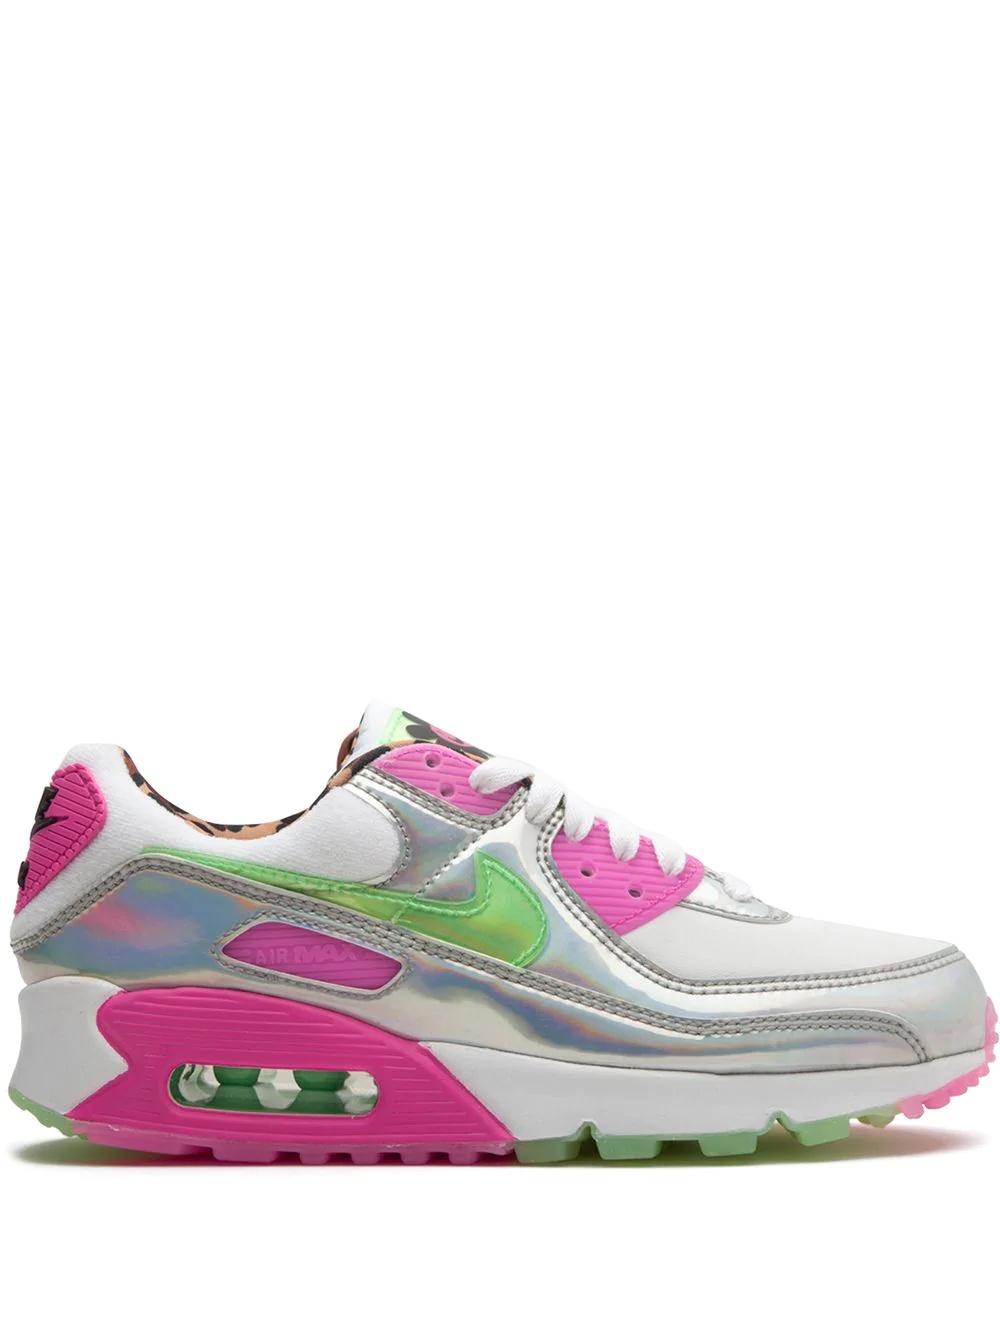 Air Max 90 LX "Iridescent Leopard" sneakers - 1